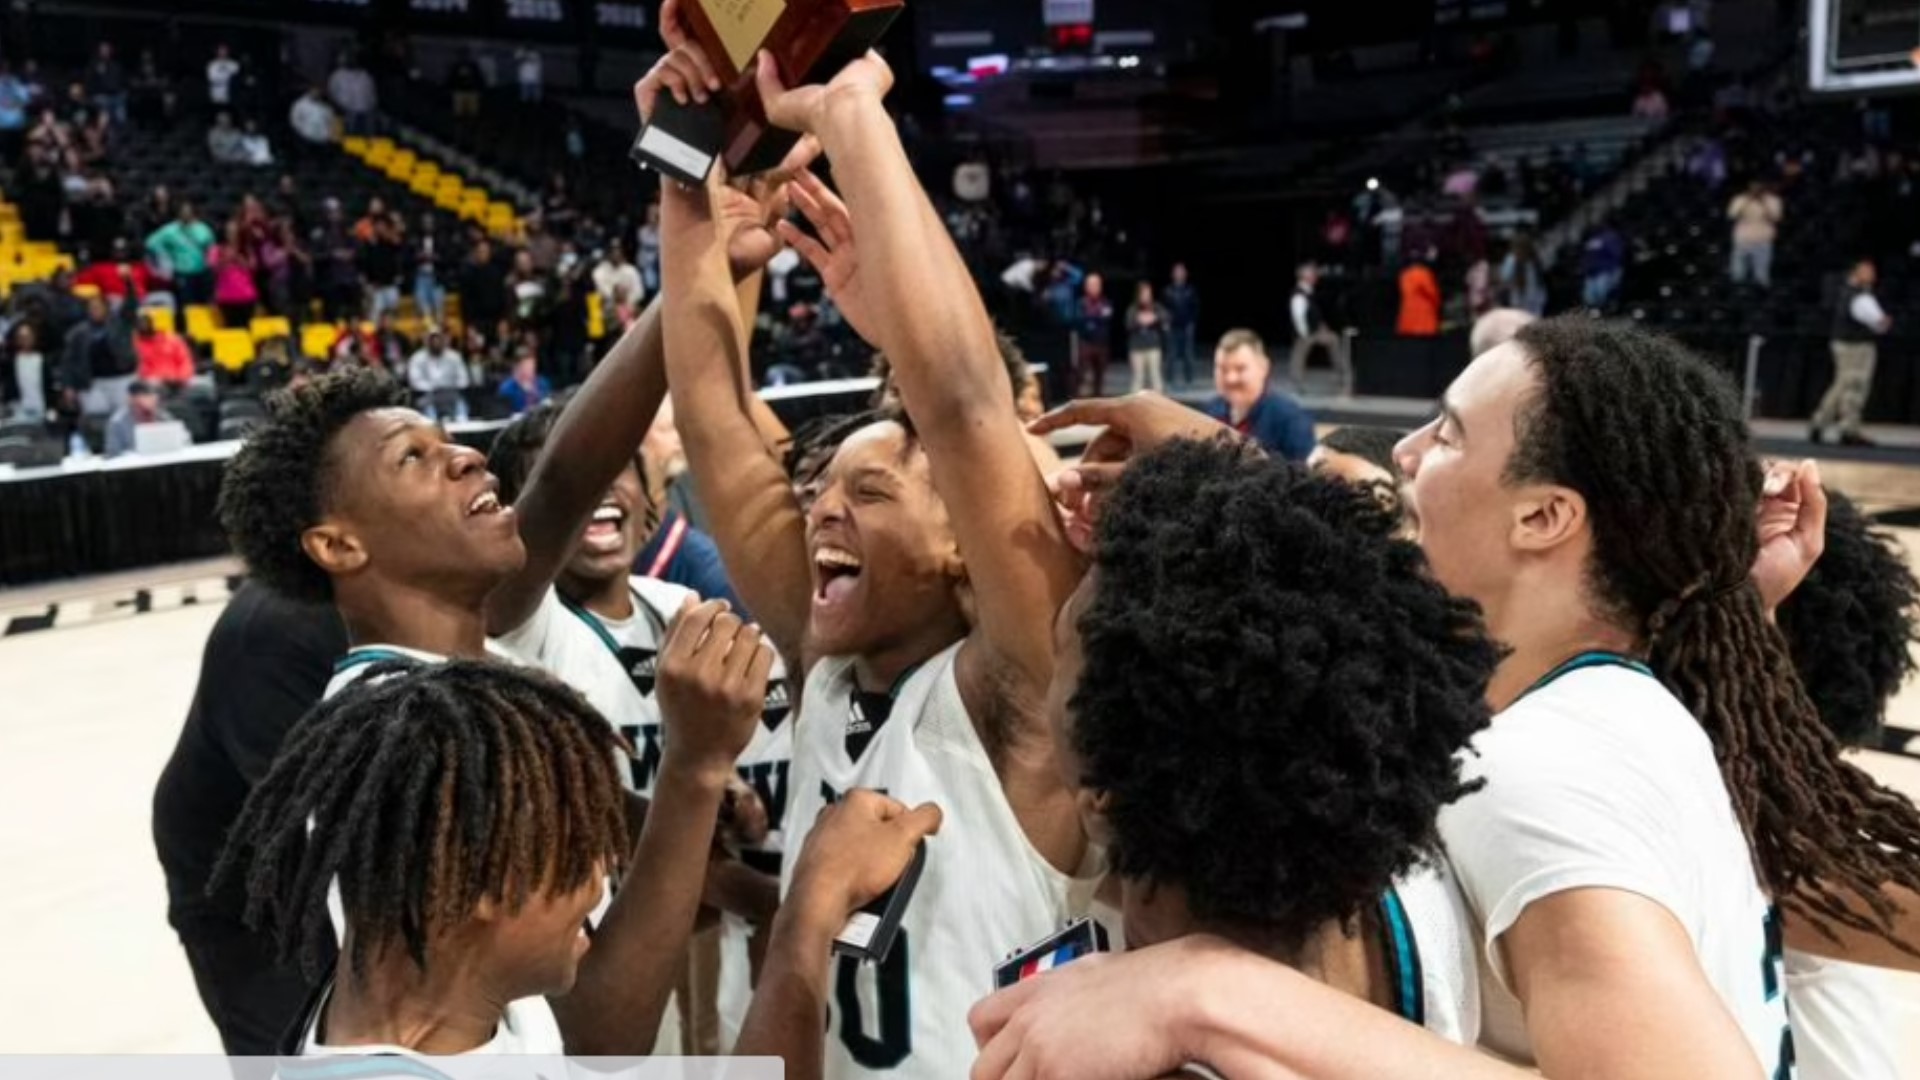 Woodside erased a 16 point deficit to clinch the Class 5 boys championship, and the Princess Anne girls captured their 13th overall state title.